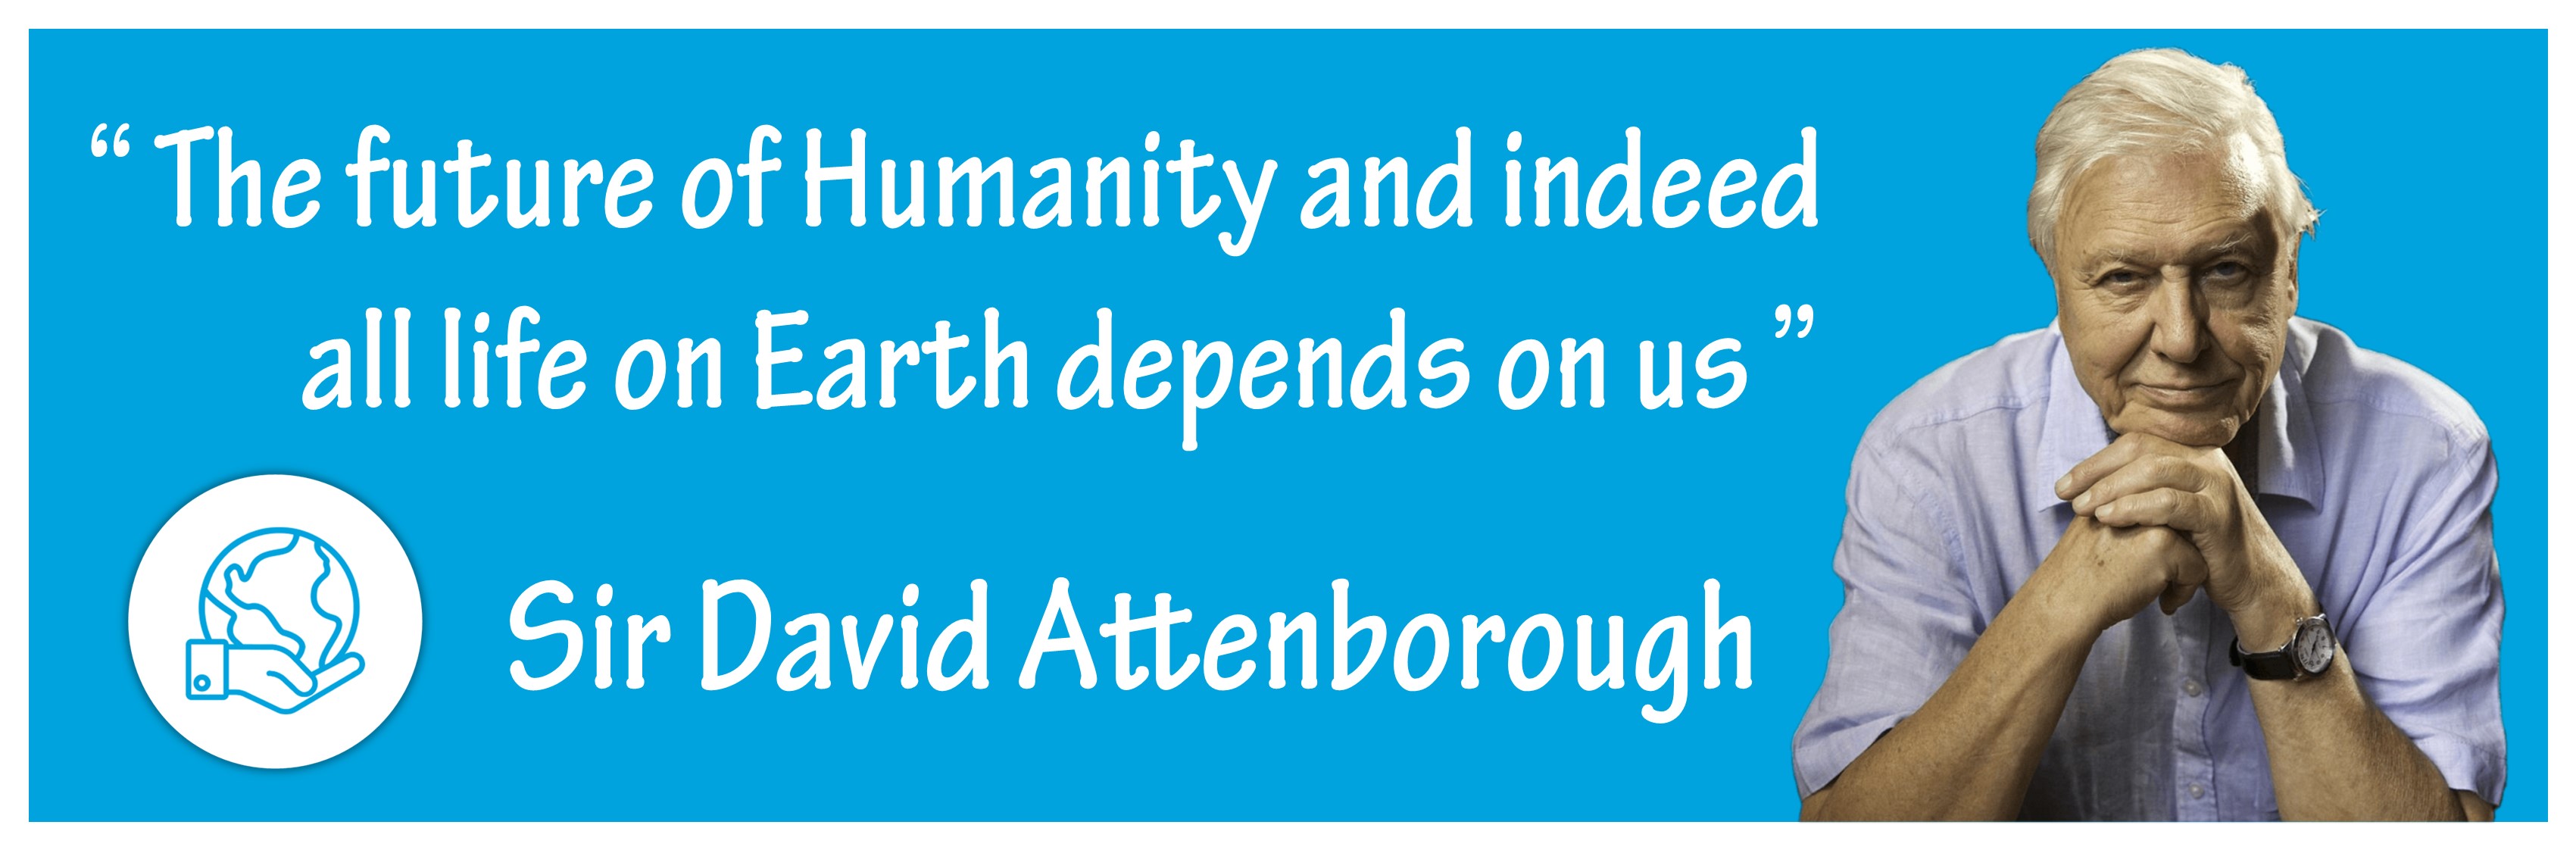 Attenborough - House Heroes Quote Banners July 2020